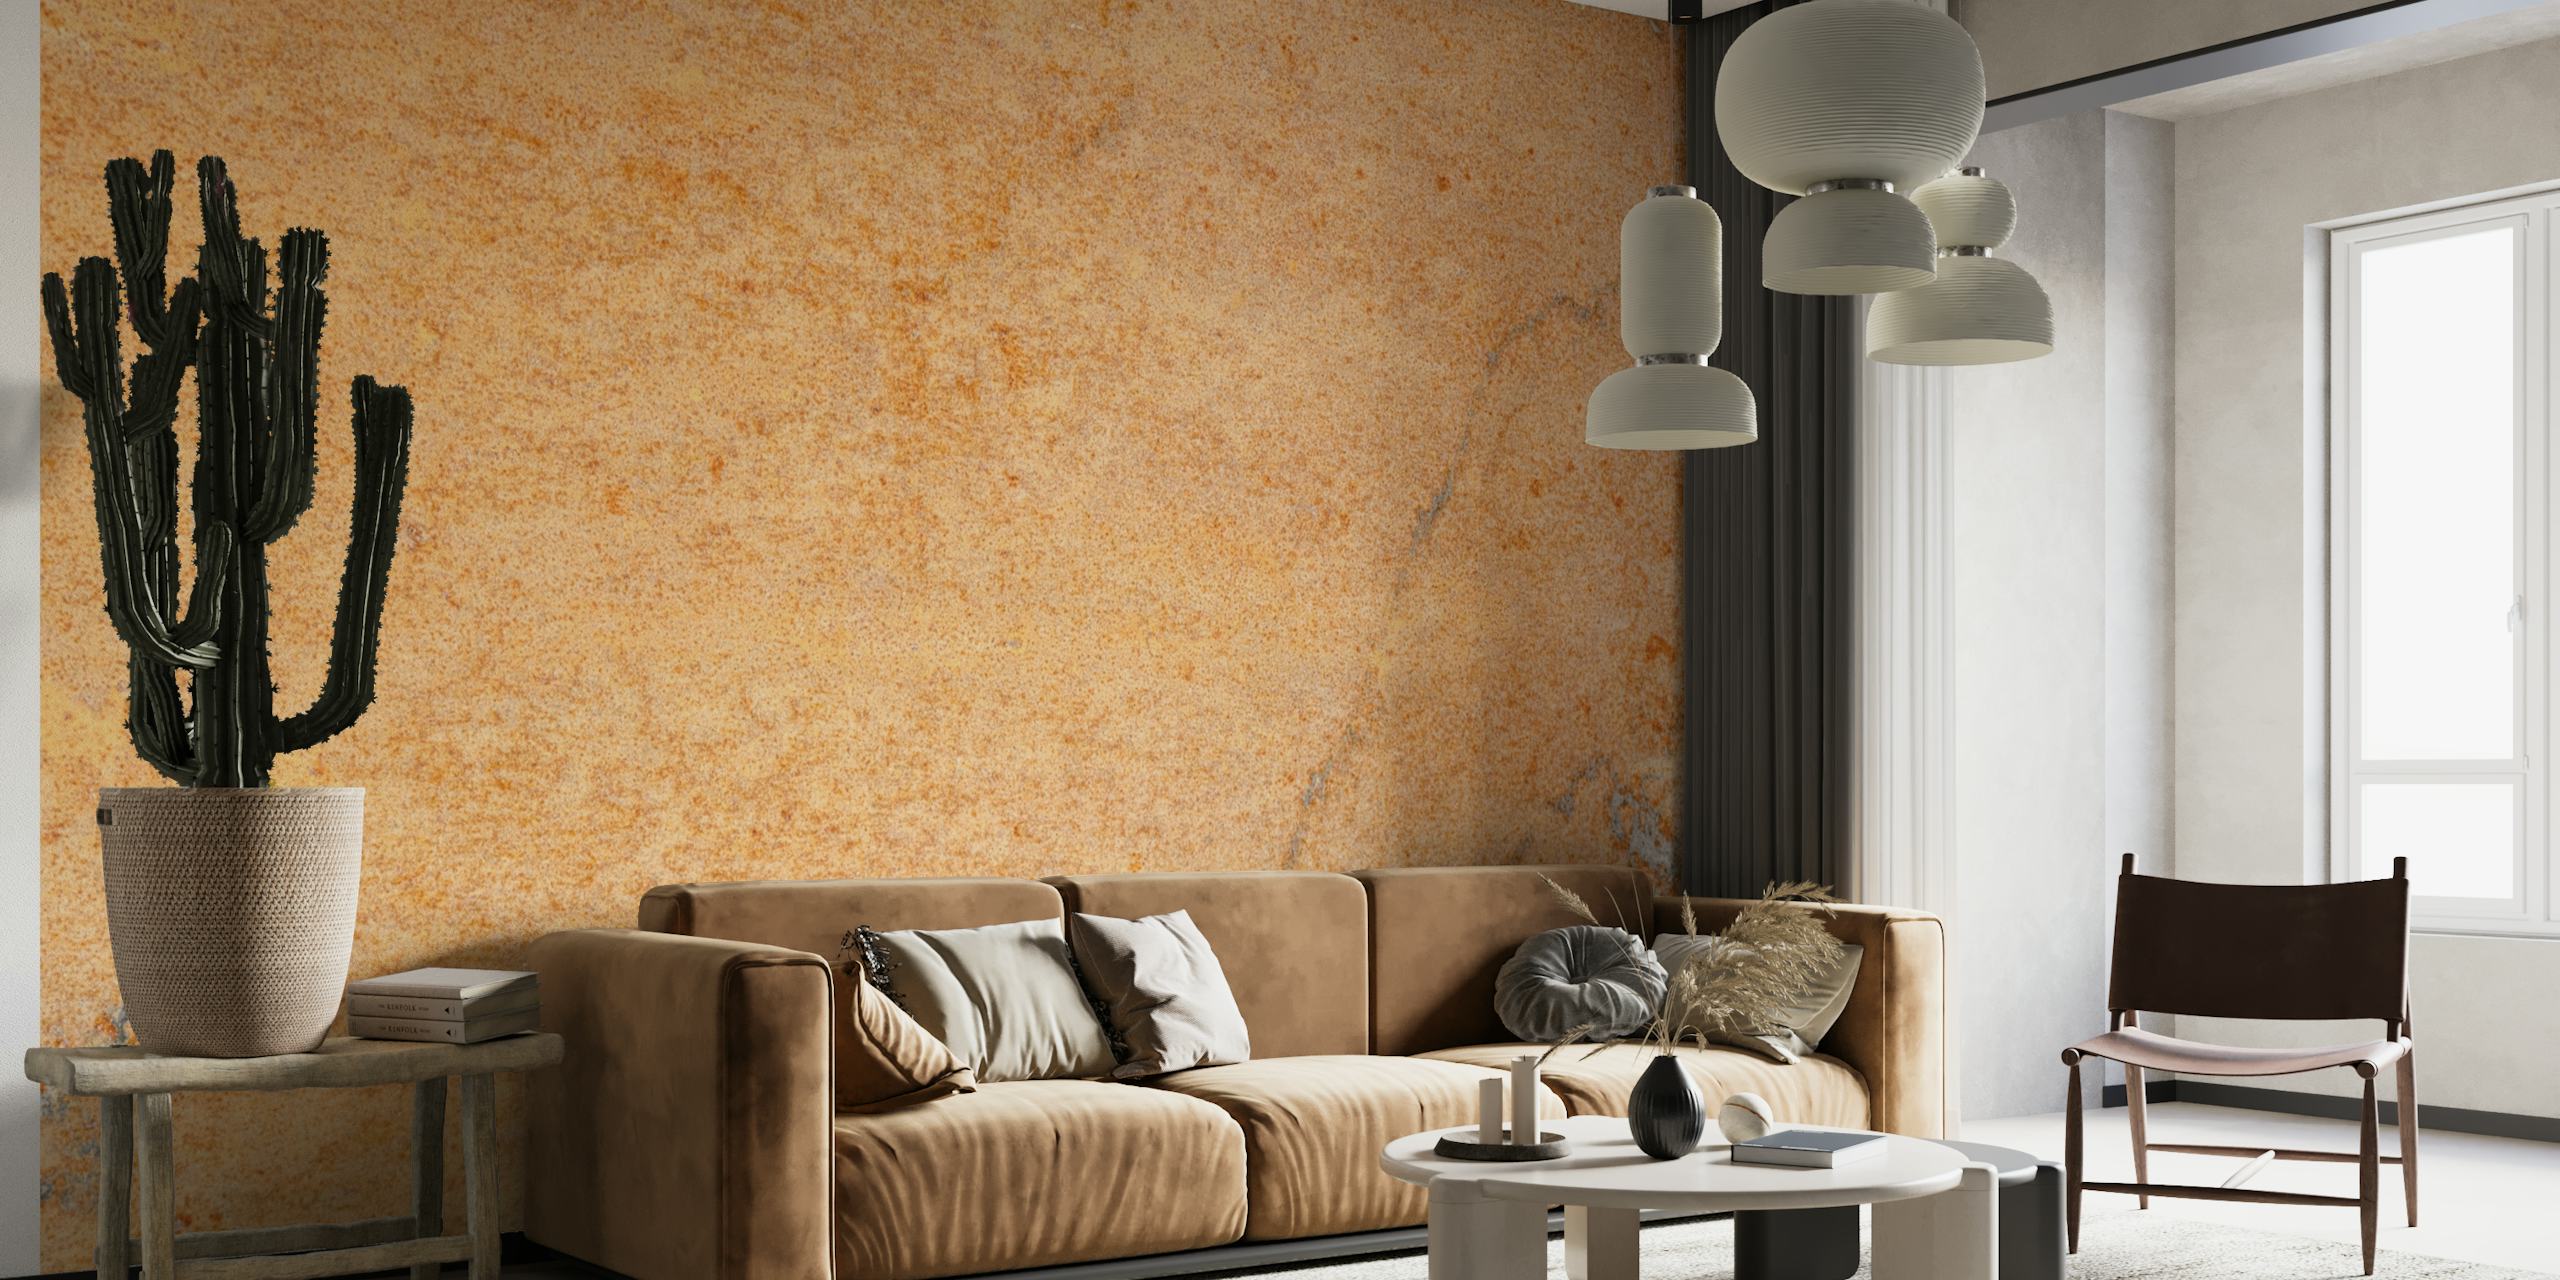 A textured wall mural with warm sandy hues and natural stone appearance for interior decoration